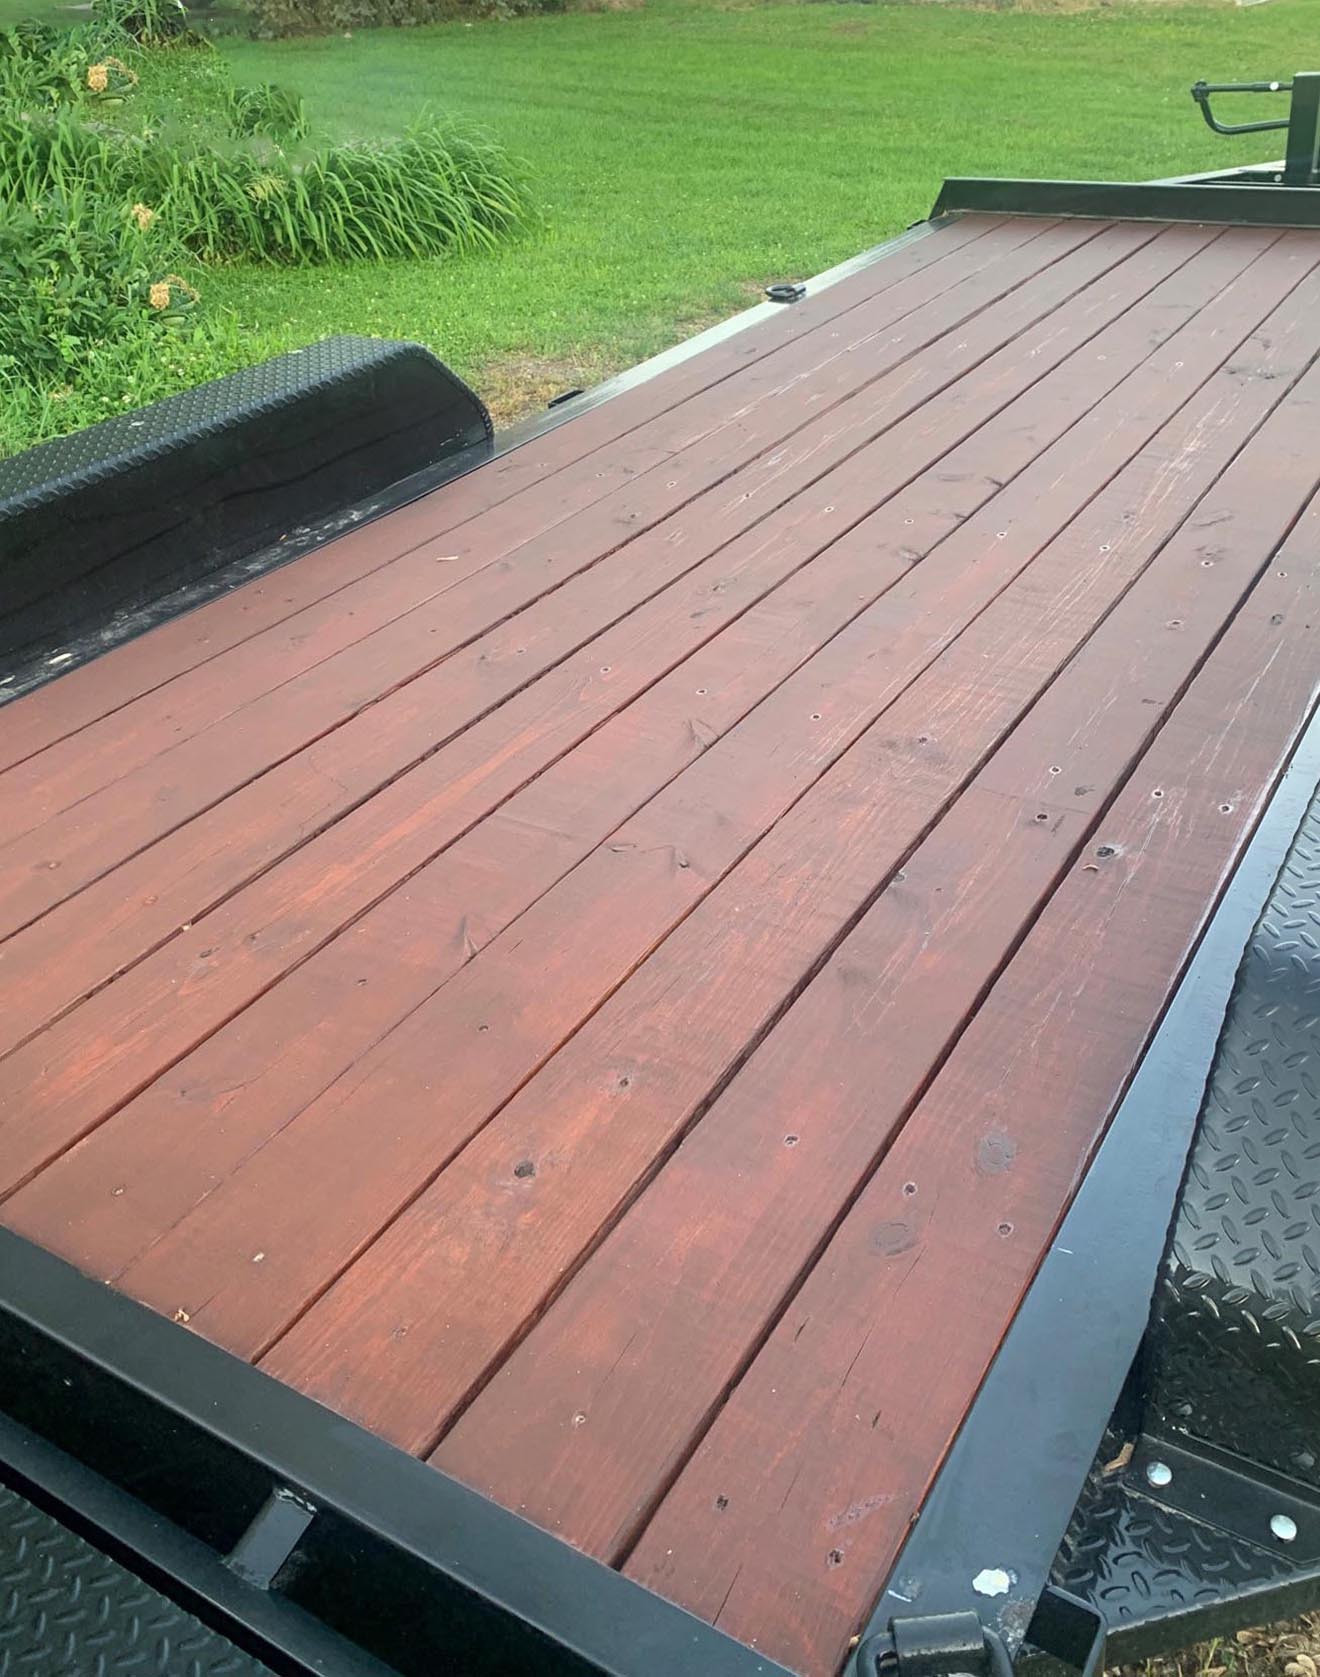 APITONG OIL Applied to the deck on a 20 ft equipment trailer